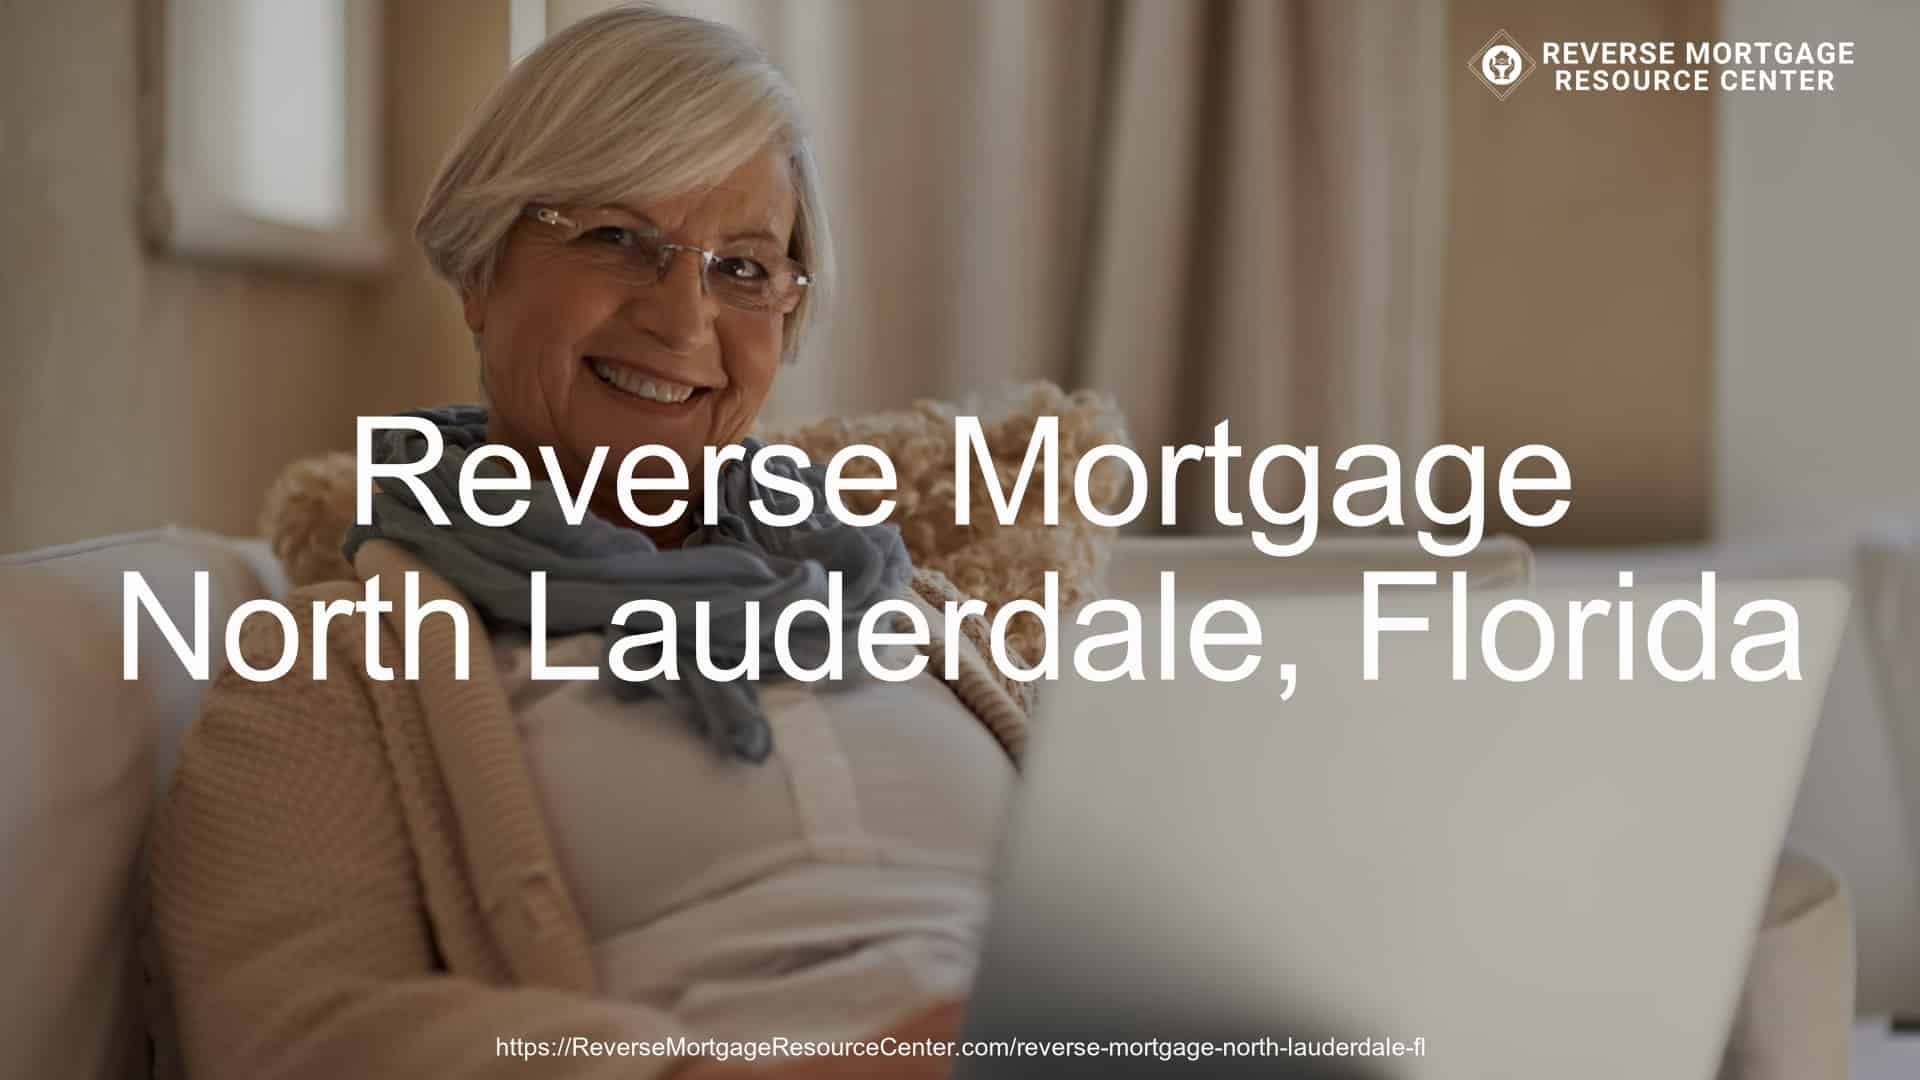 Reverse Mortgage Loans in North Lauderdale Florida